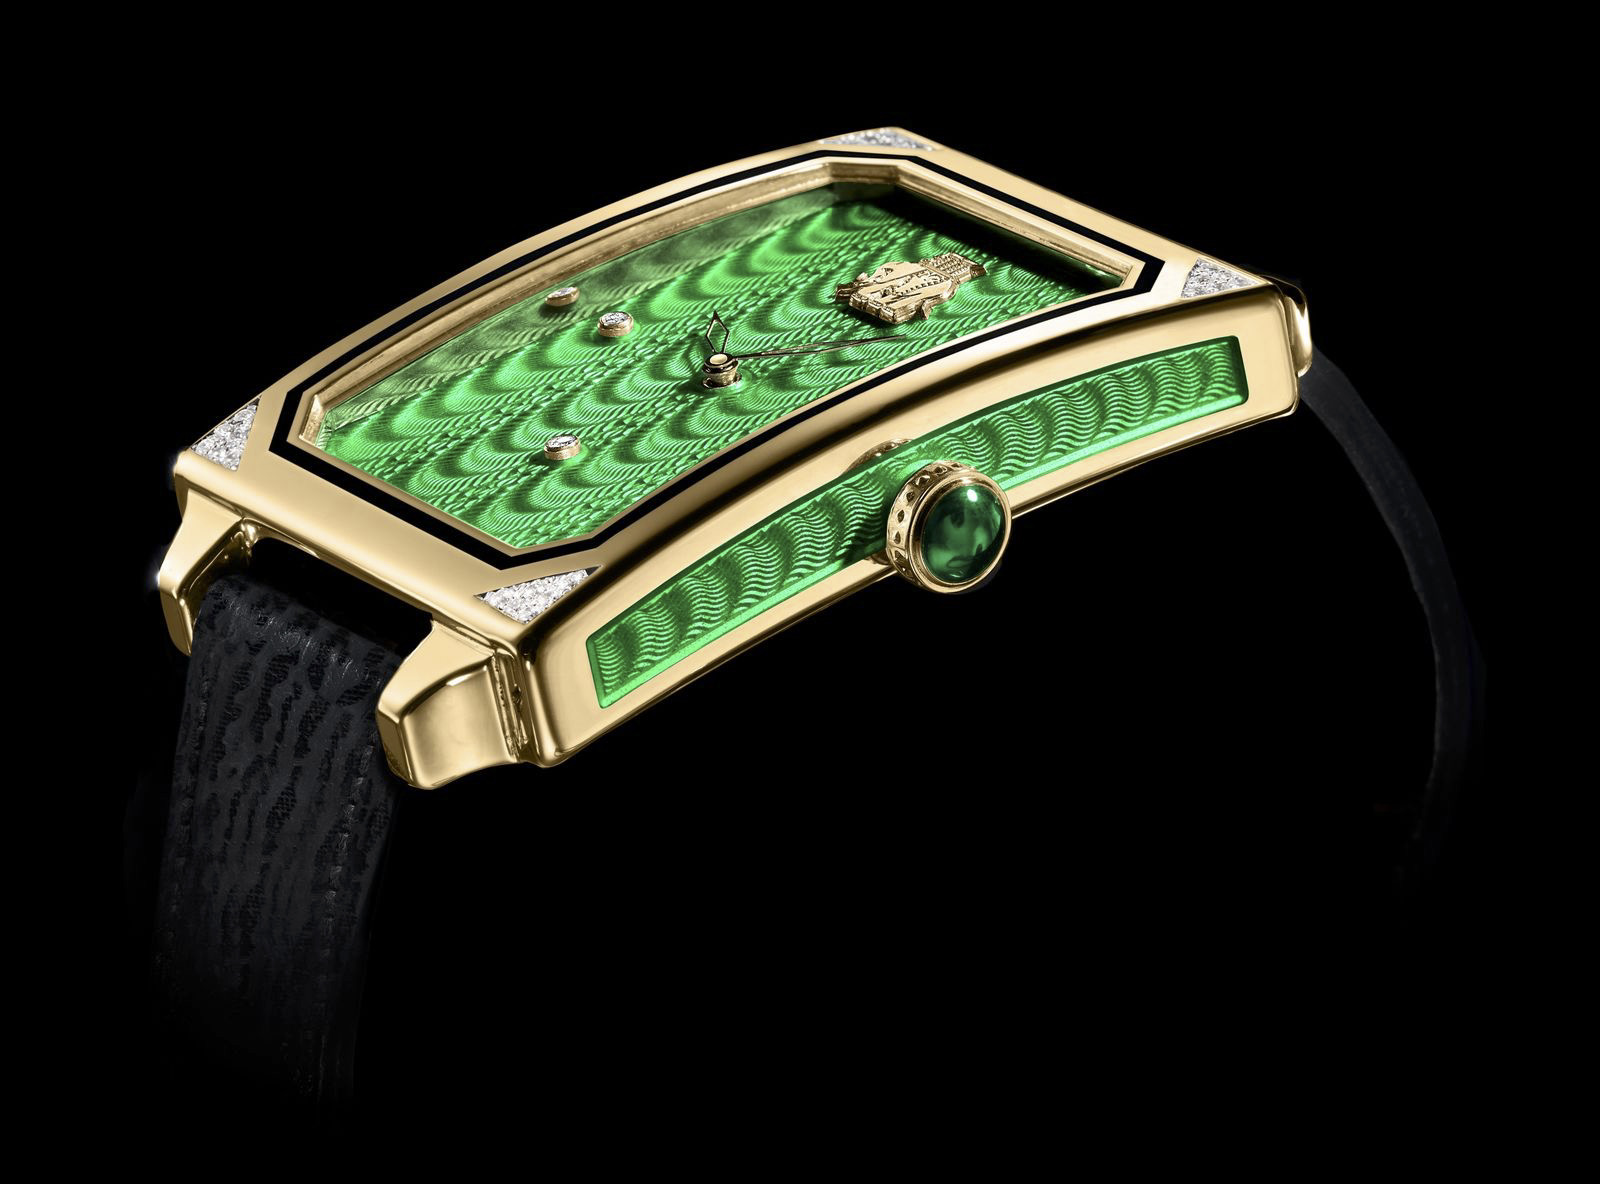 Michel Perchin Channels The Artistry And Craftsmanship of Fabergé In The Model No. 1